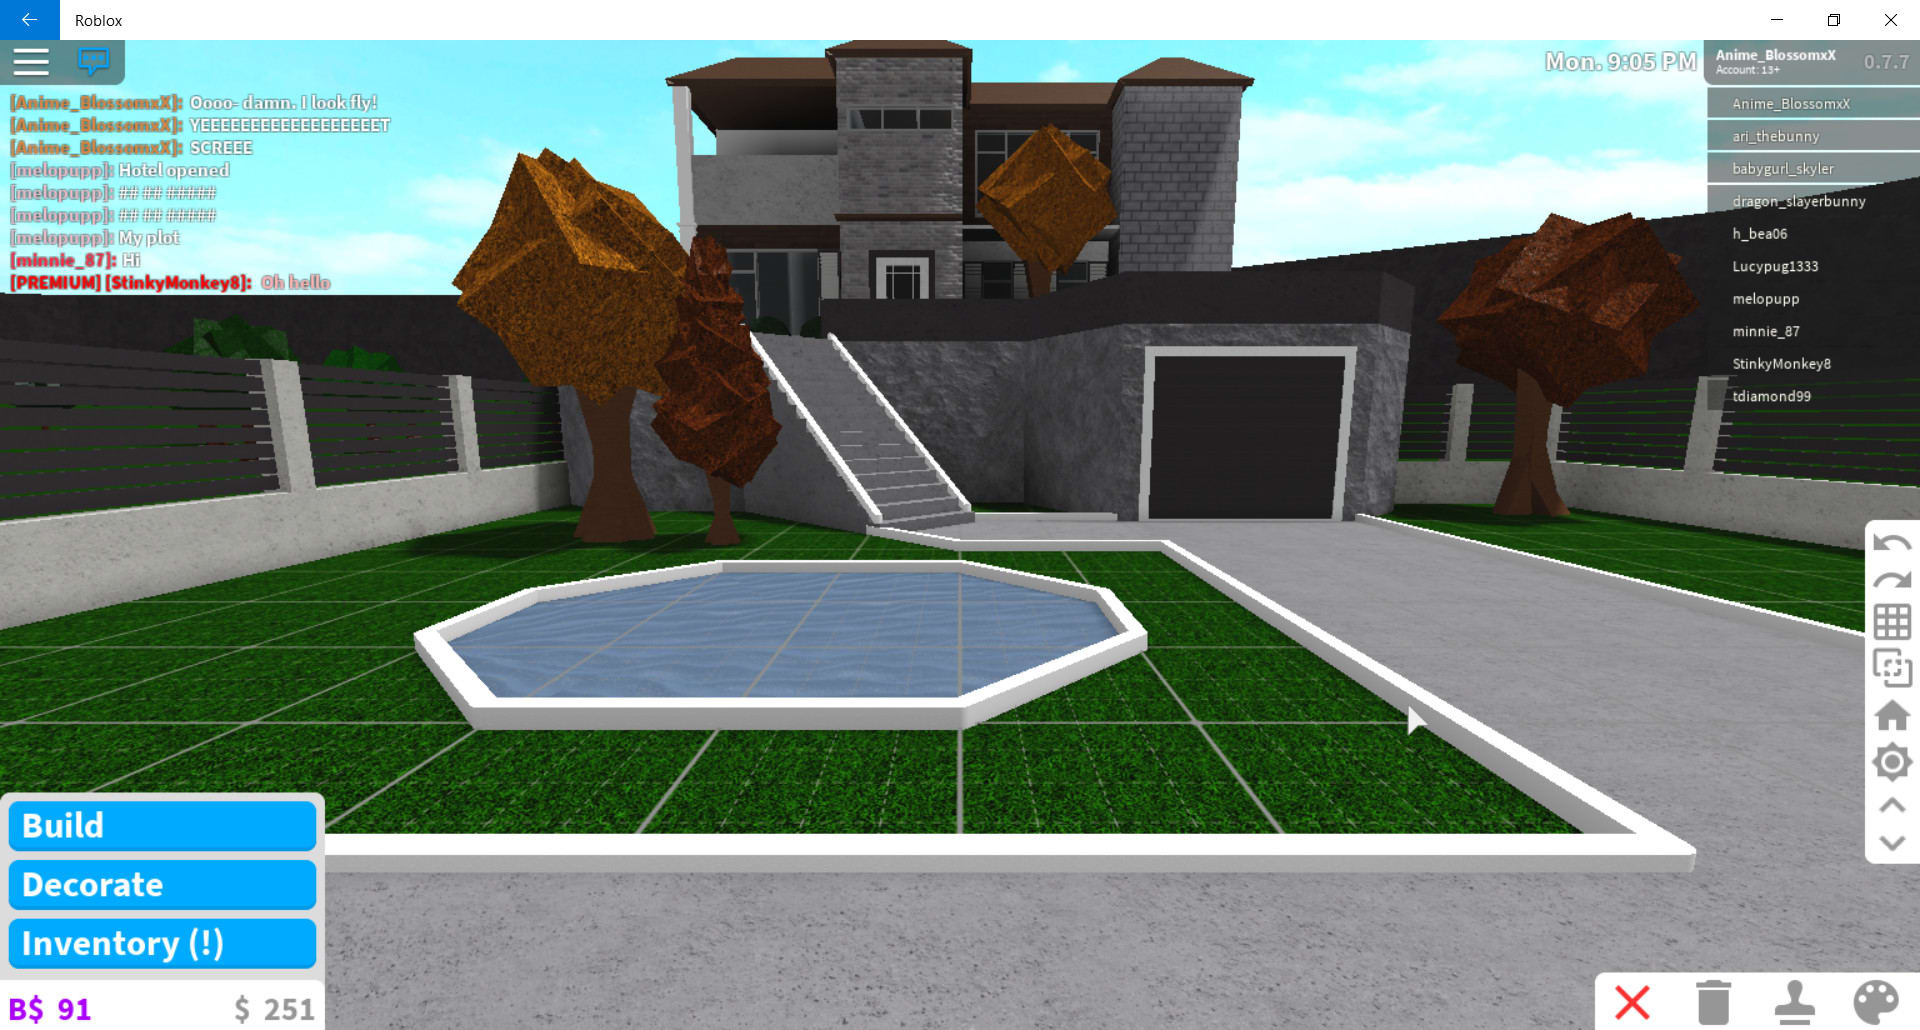 Build A Medium Home In Roblox Bloxbrg For Under 75k By Aestheticbuildx